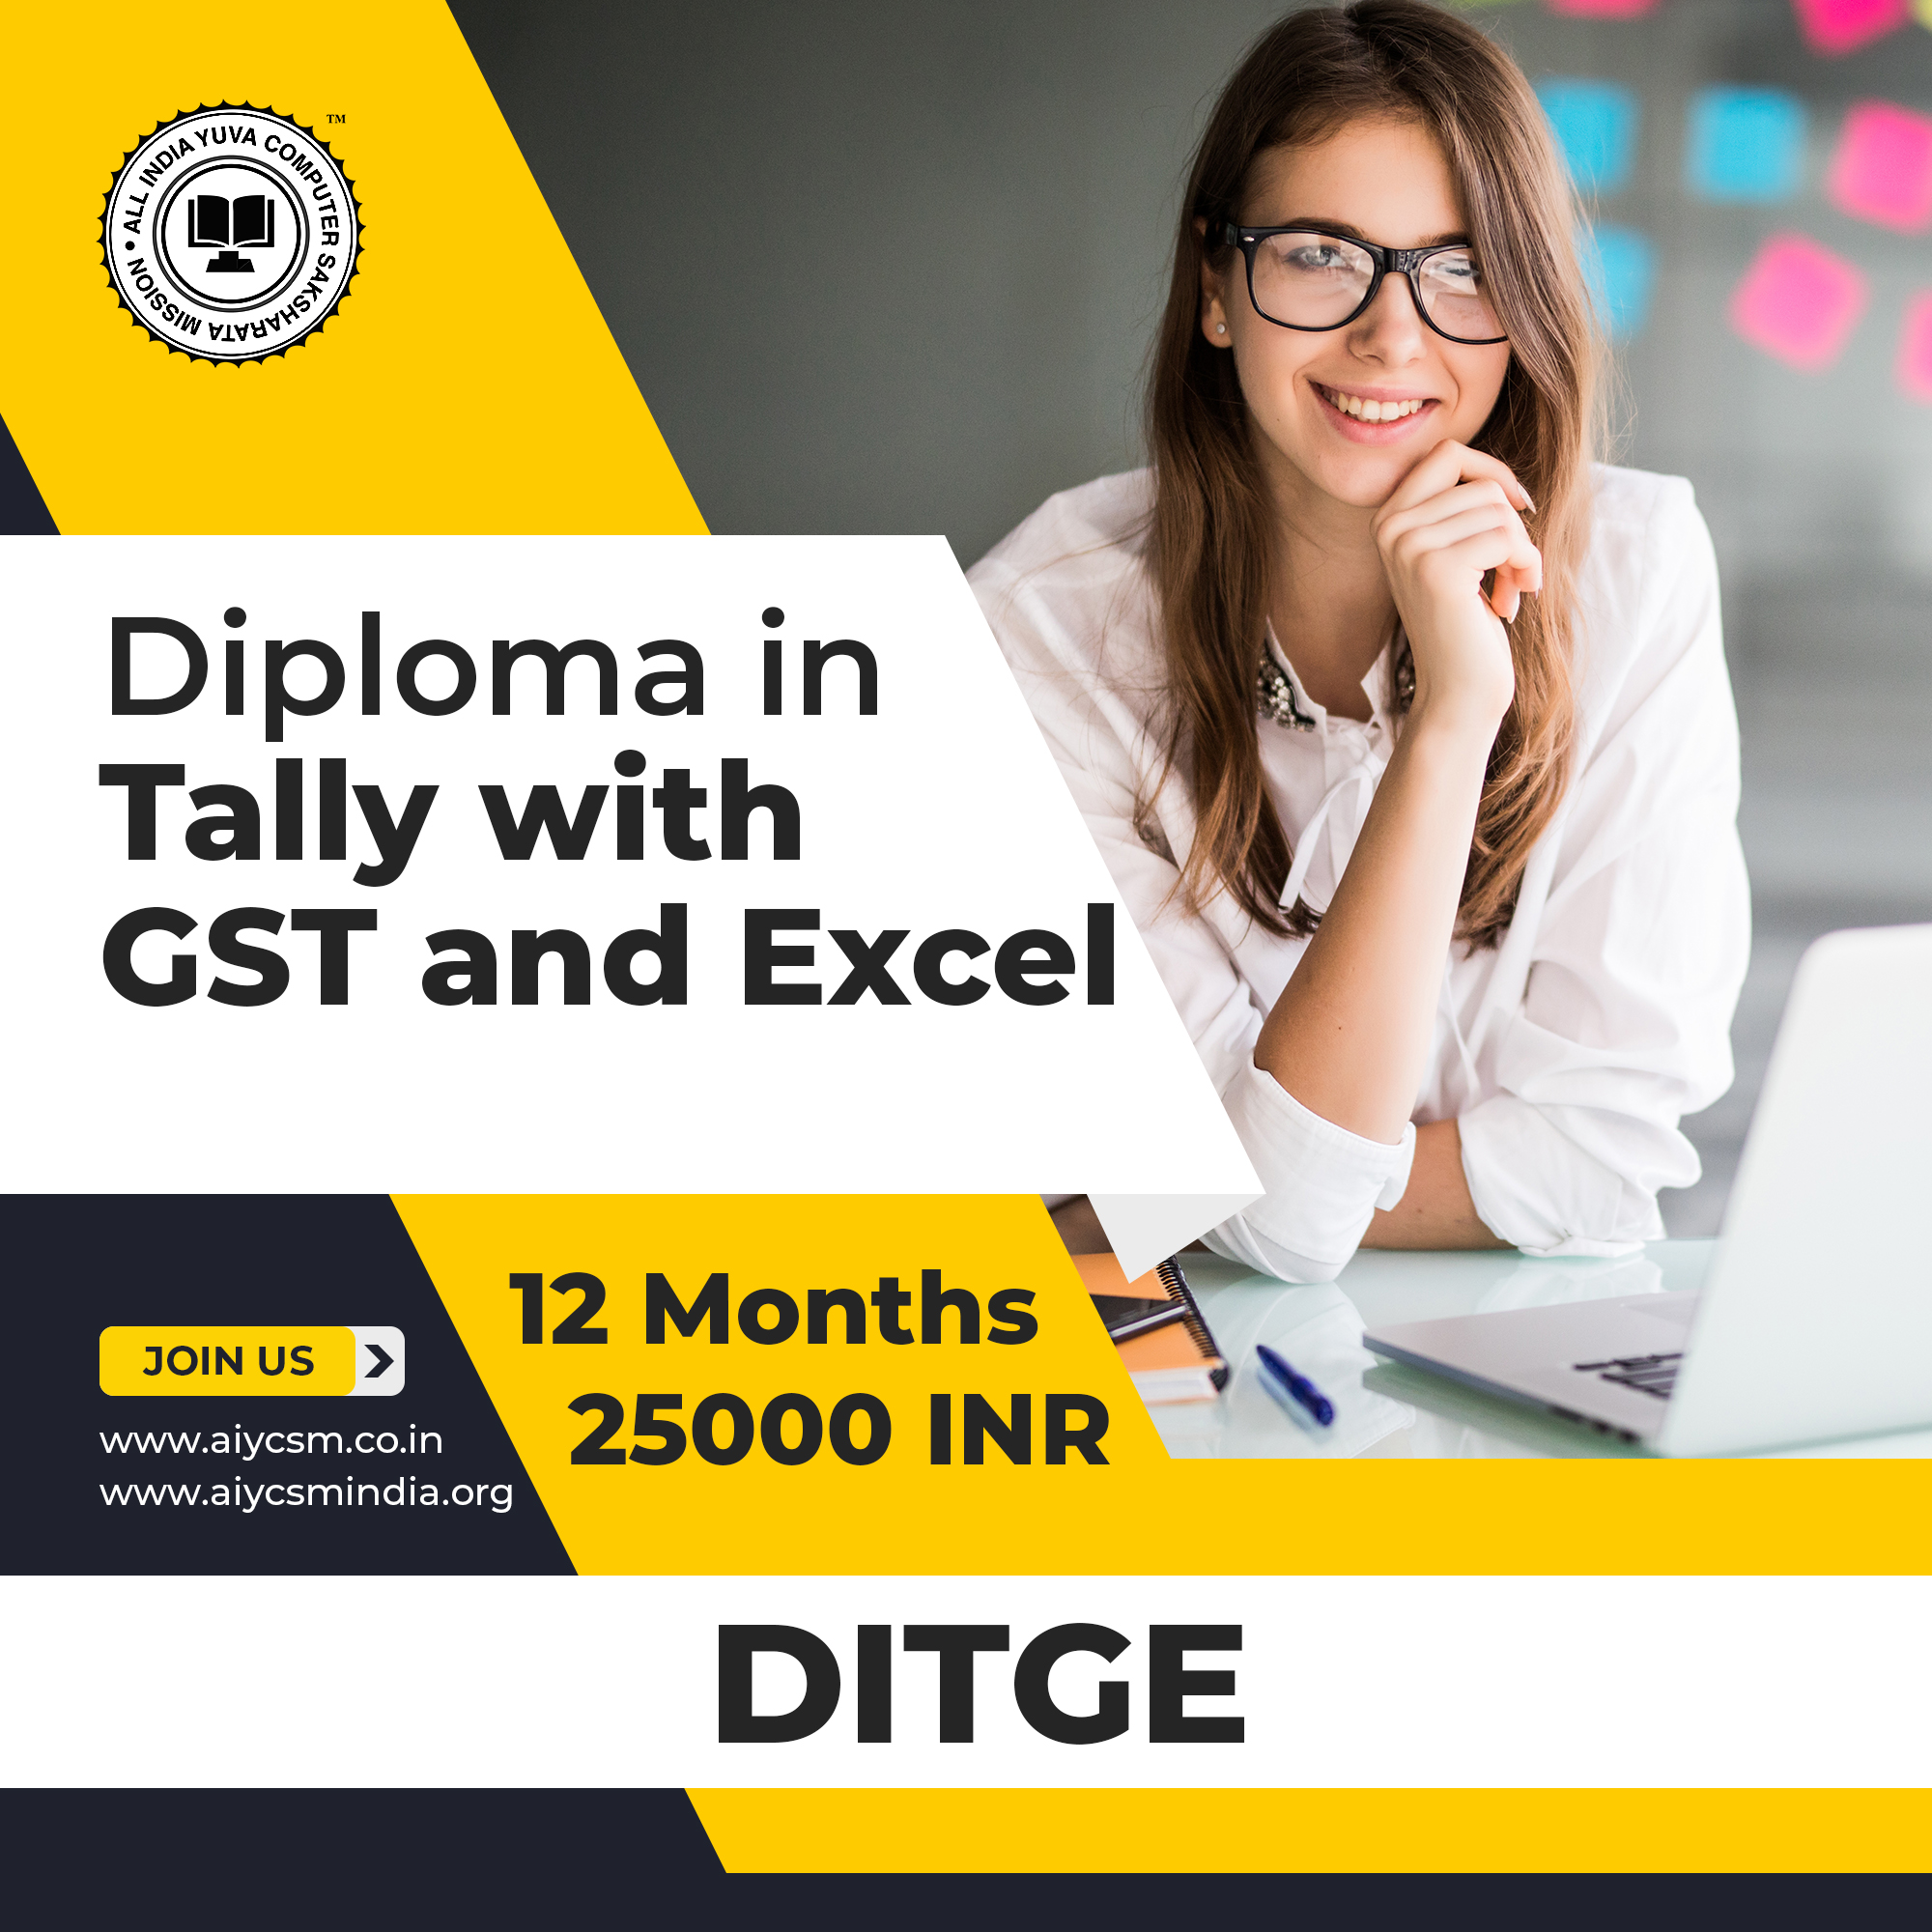 Diploma in Tally with GST and Excel